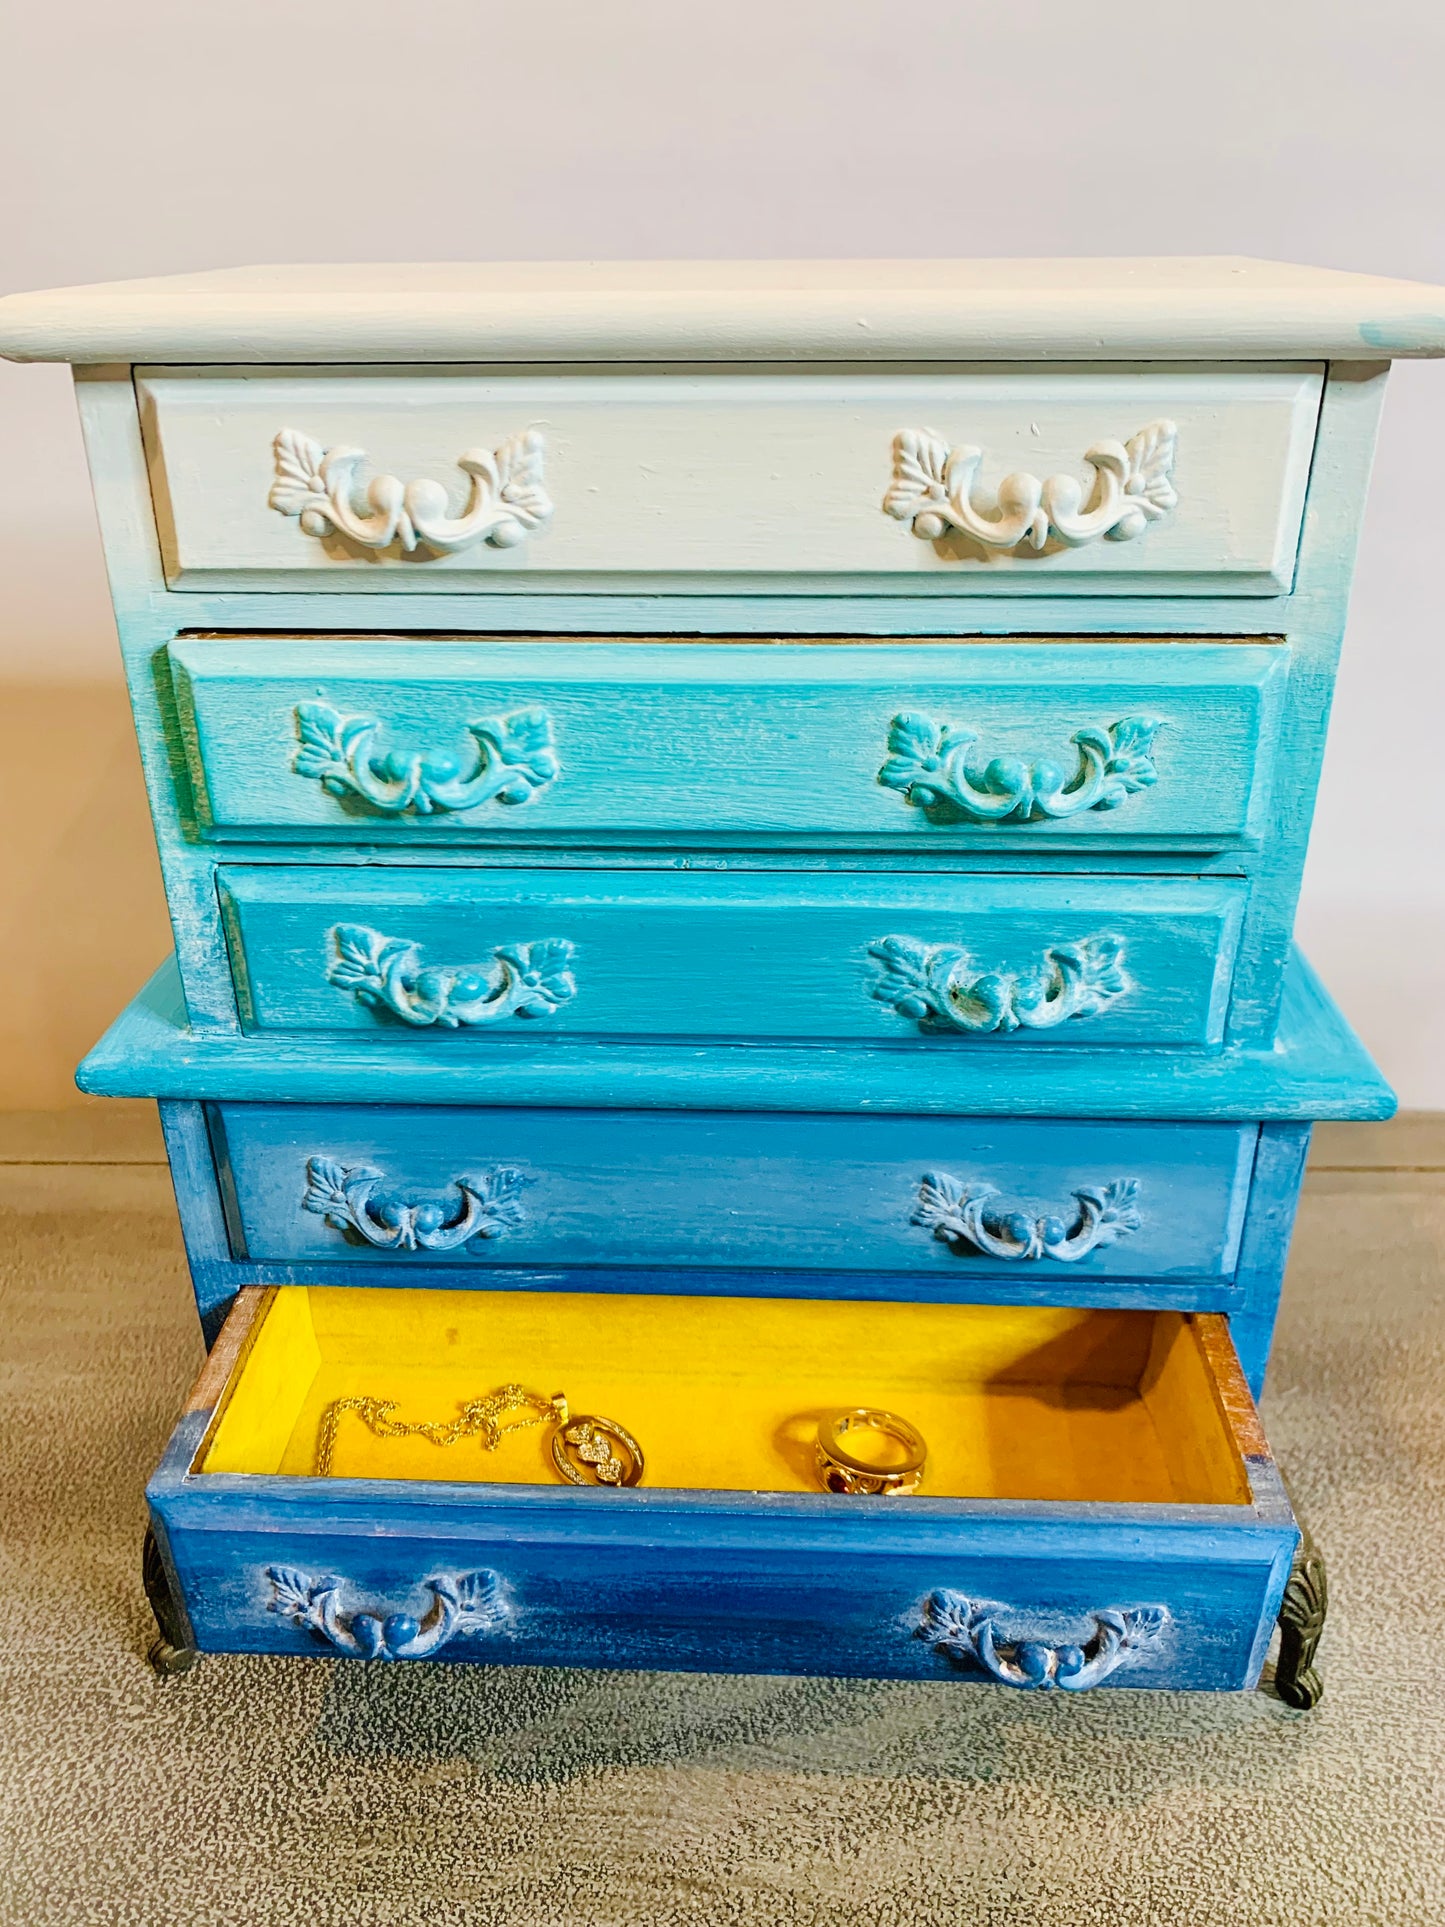 Shades of Blue Ombre' Vintage Jewelry Box